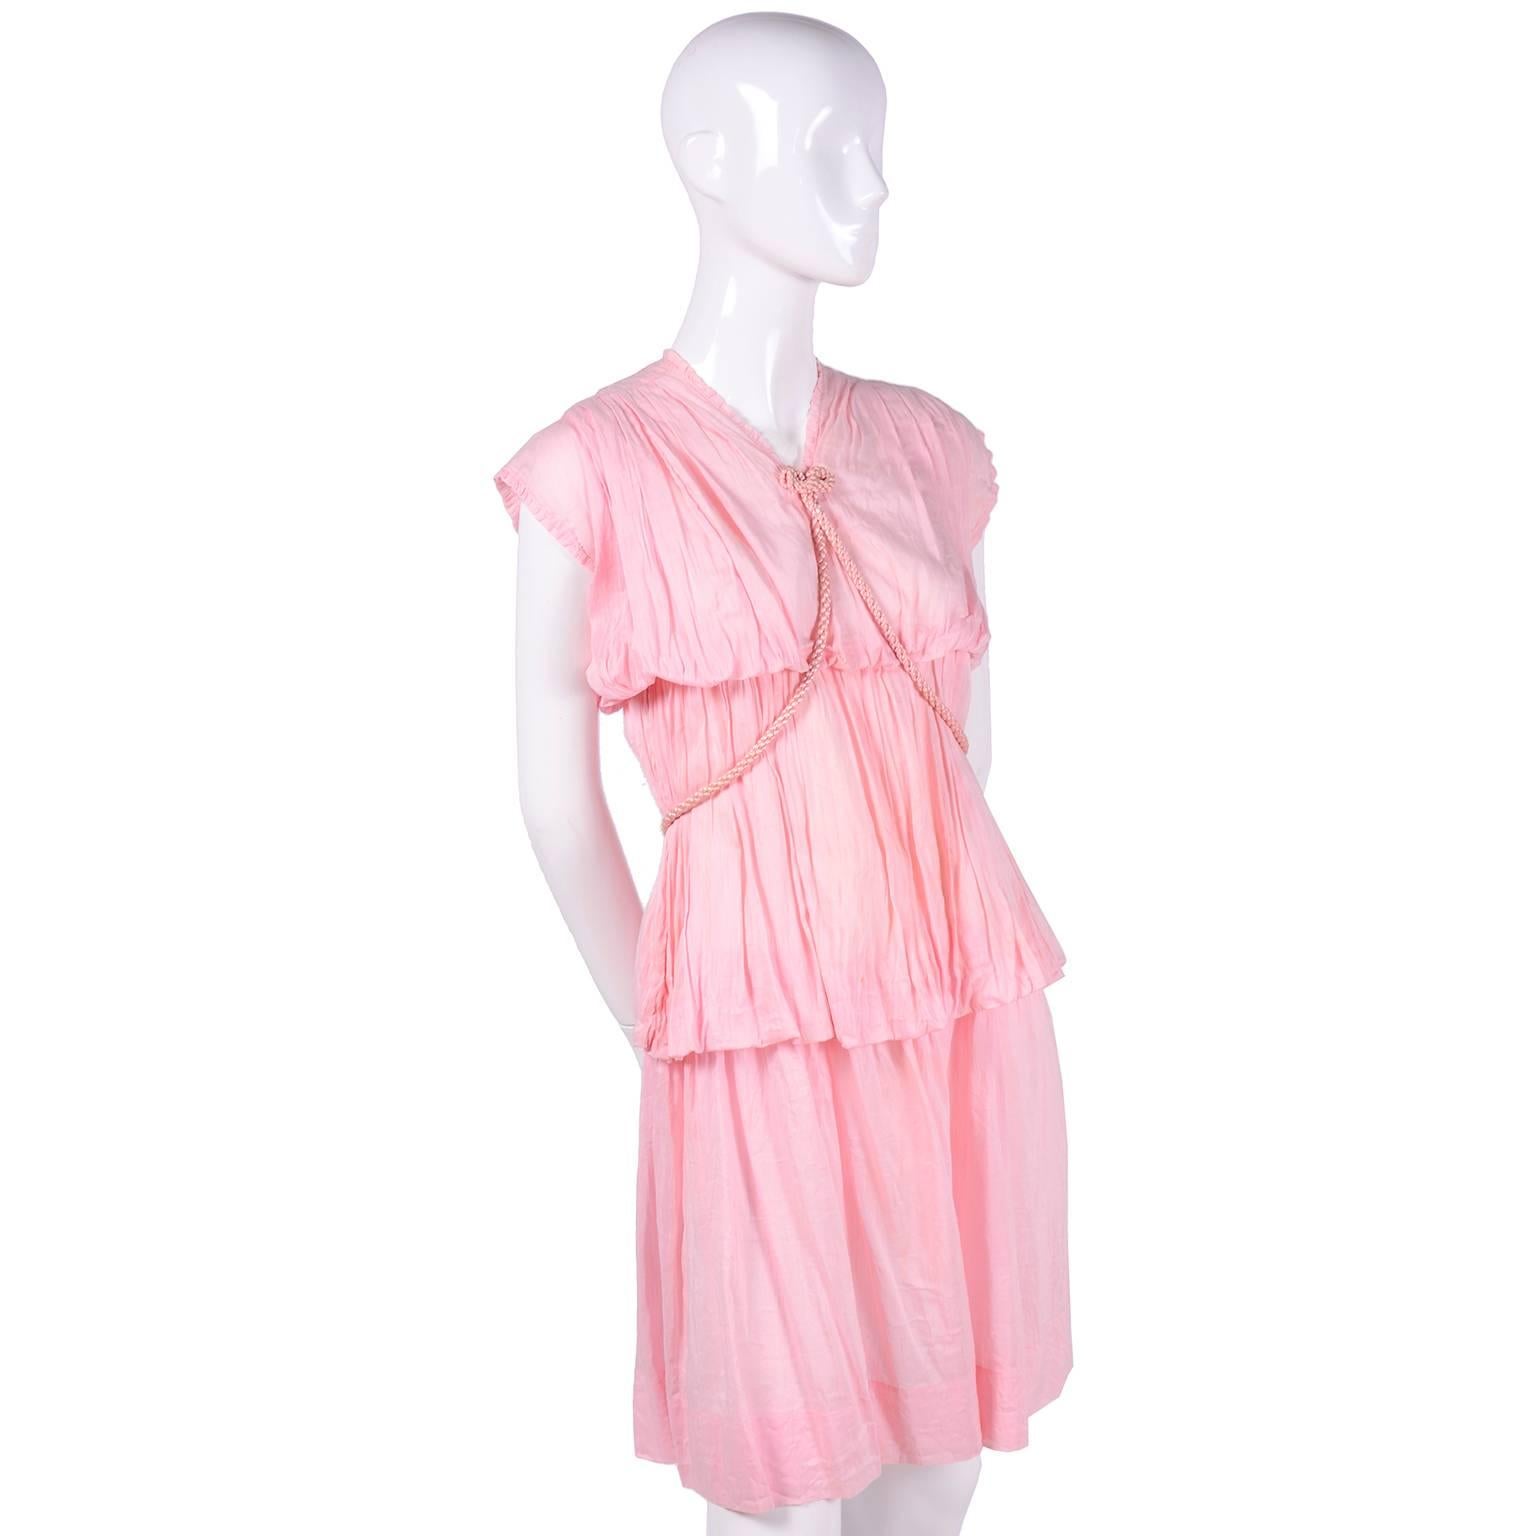 This is an absolutely beautiful vintage dress from the 1920's. The dress  is in a pink ultra fine cotton voile with tiers of slightly gathered fabric and an attached braided pink satin rope belt. The belt can be worn Grecian style or worn a number